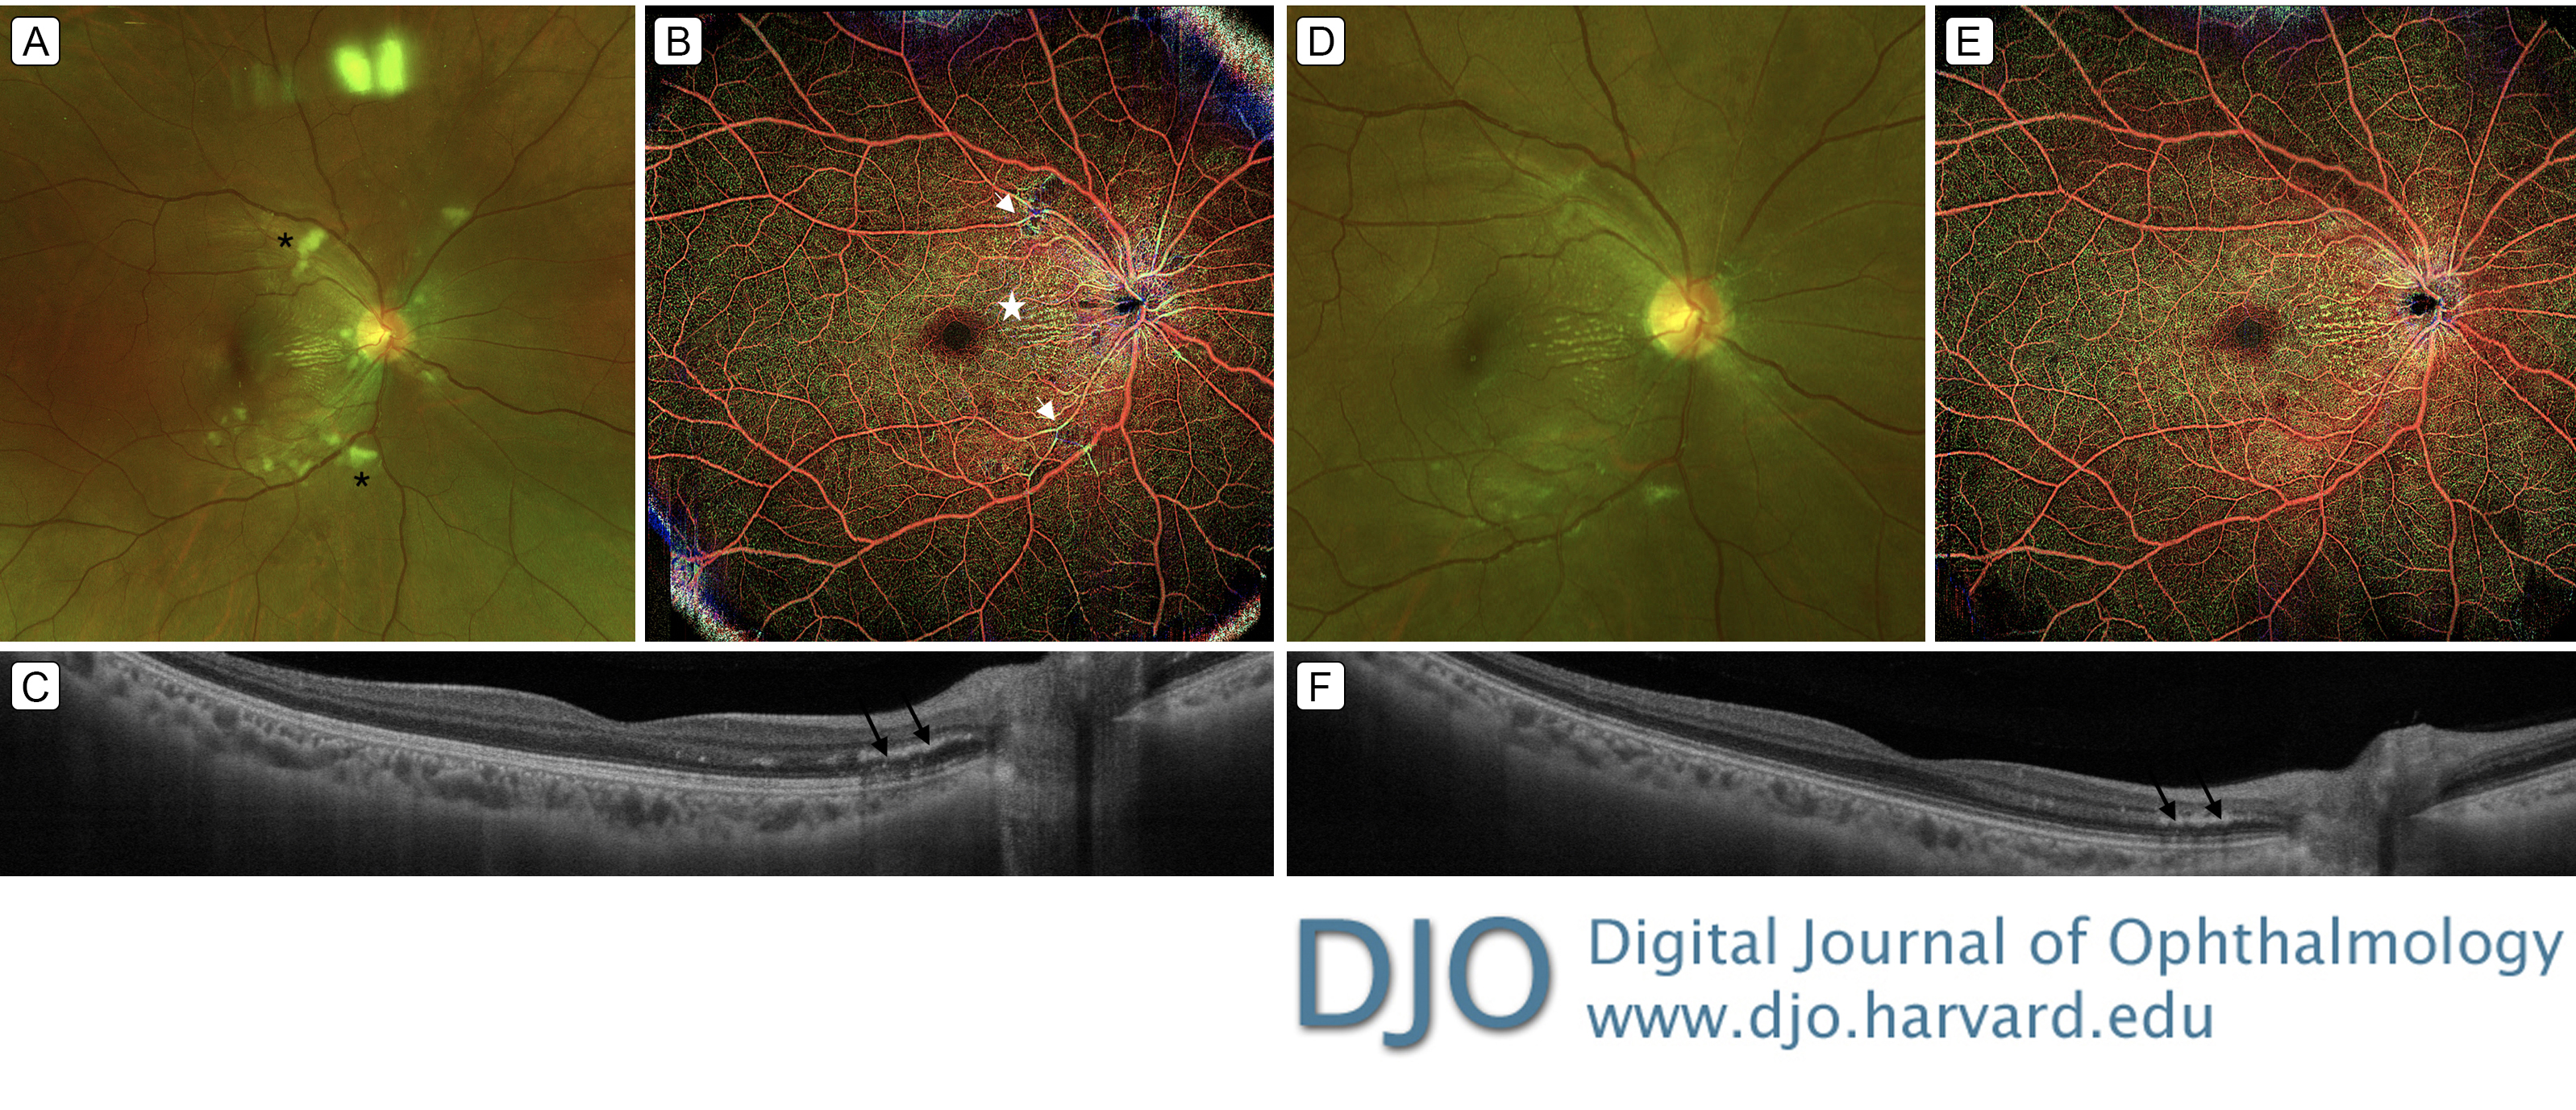 Wide-field swept source optical coherence tomography angiography: a noninvasive tool for the assessment of retinal changes associated with hypertensive emergency